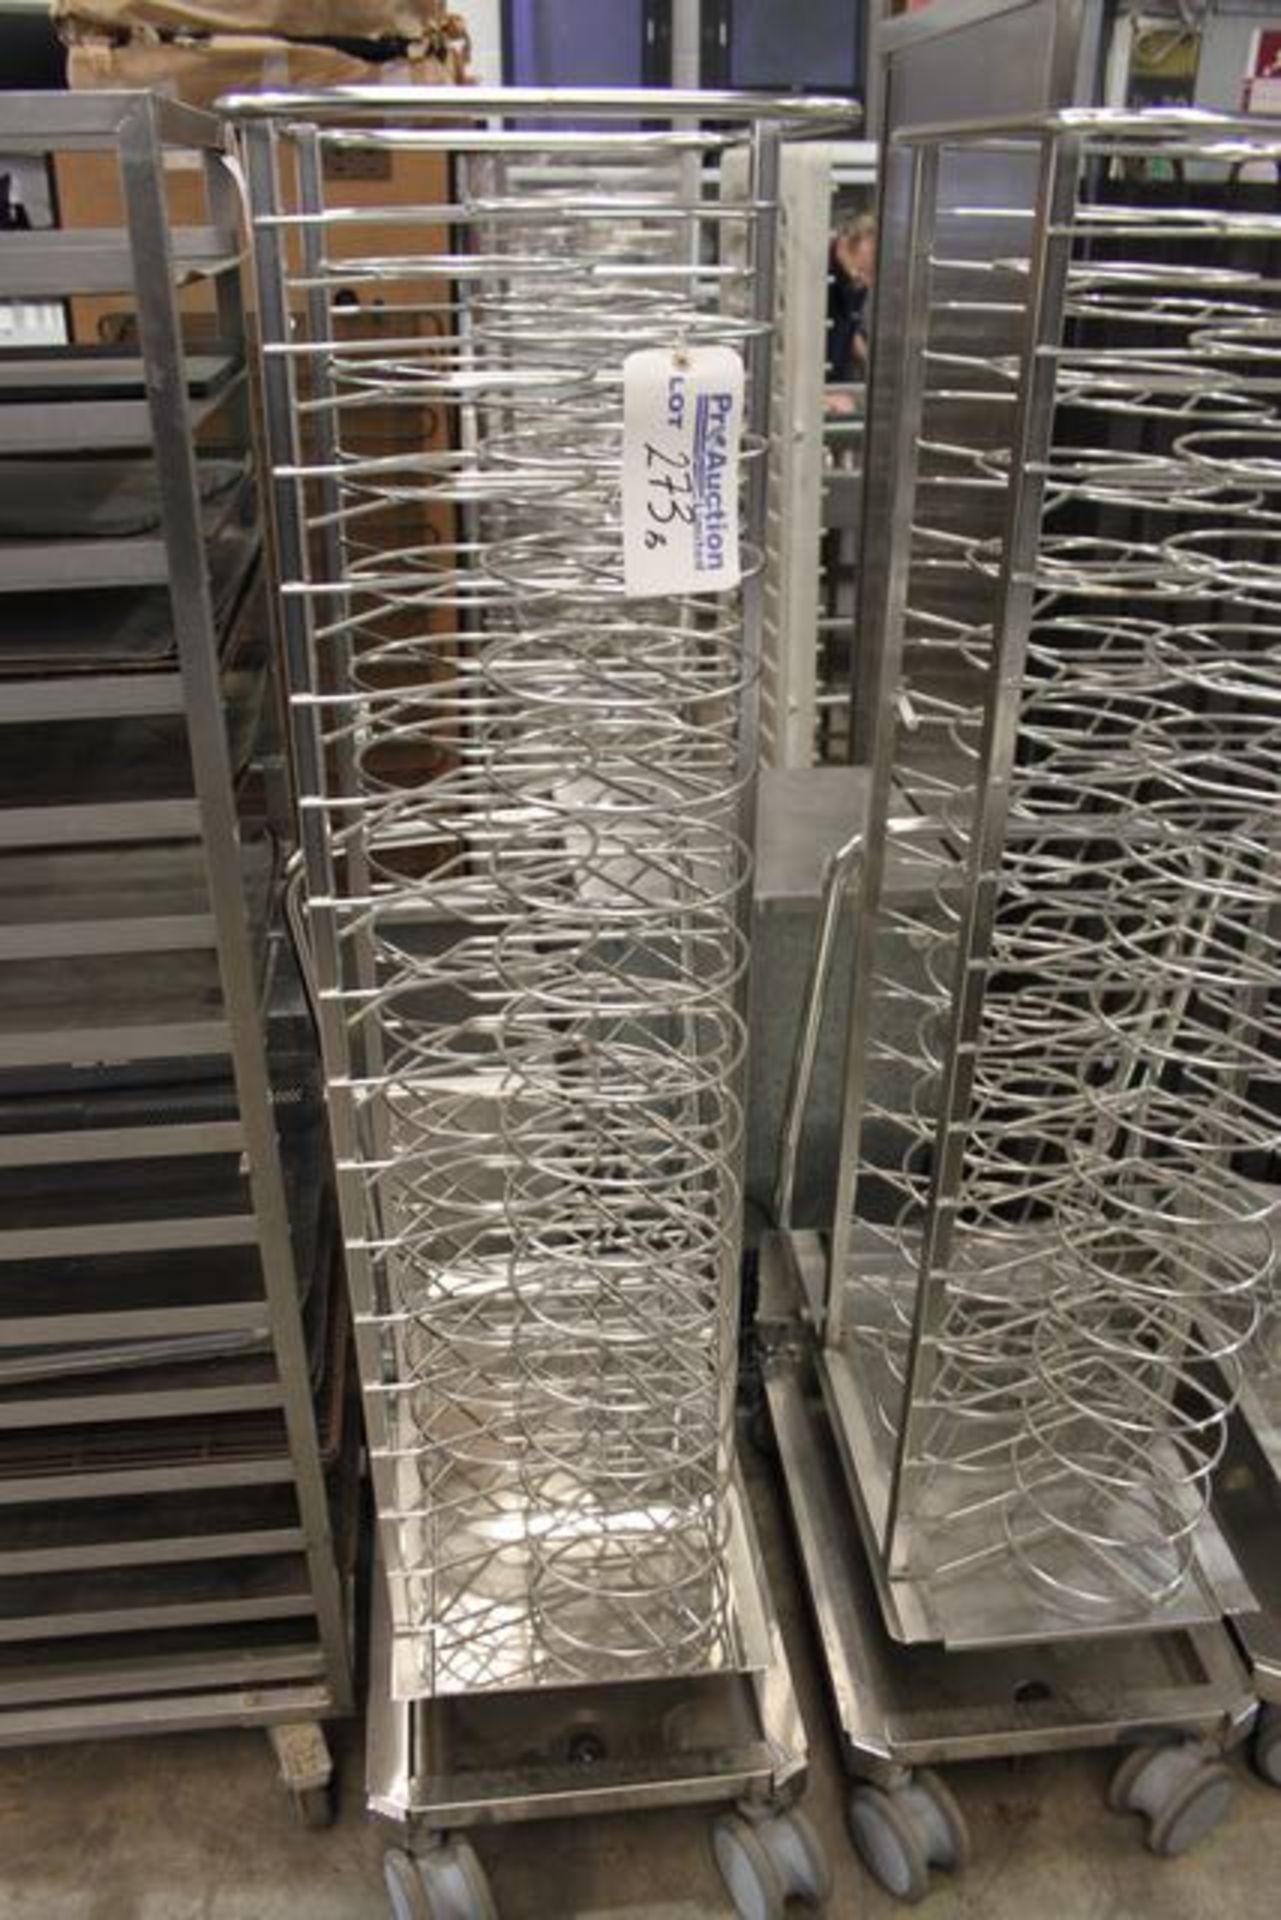 Rational 60.21.104 mobile plate rack model 201 holds 50 plates maximum plate height - 32mm maximum